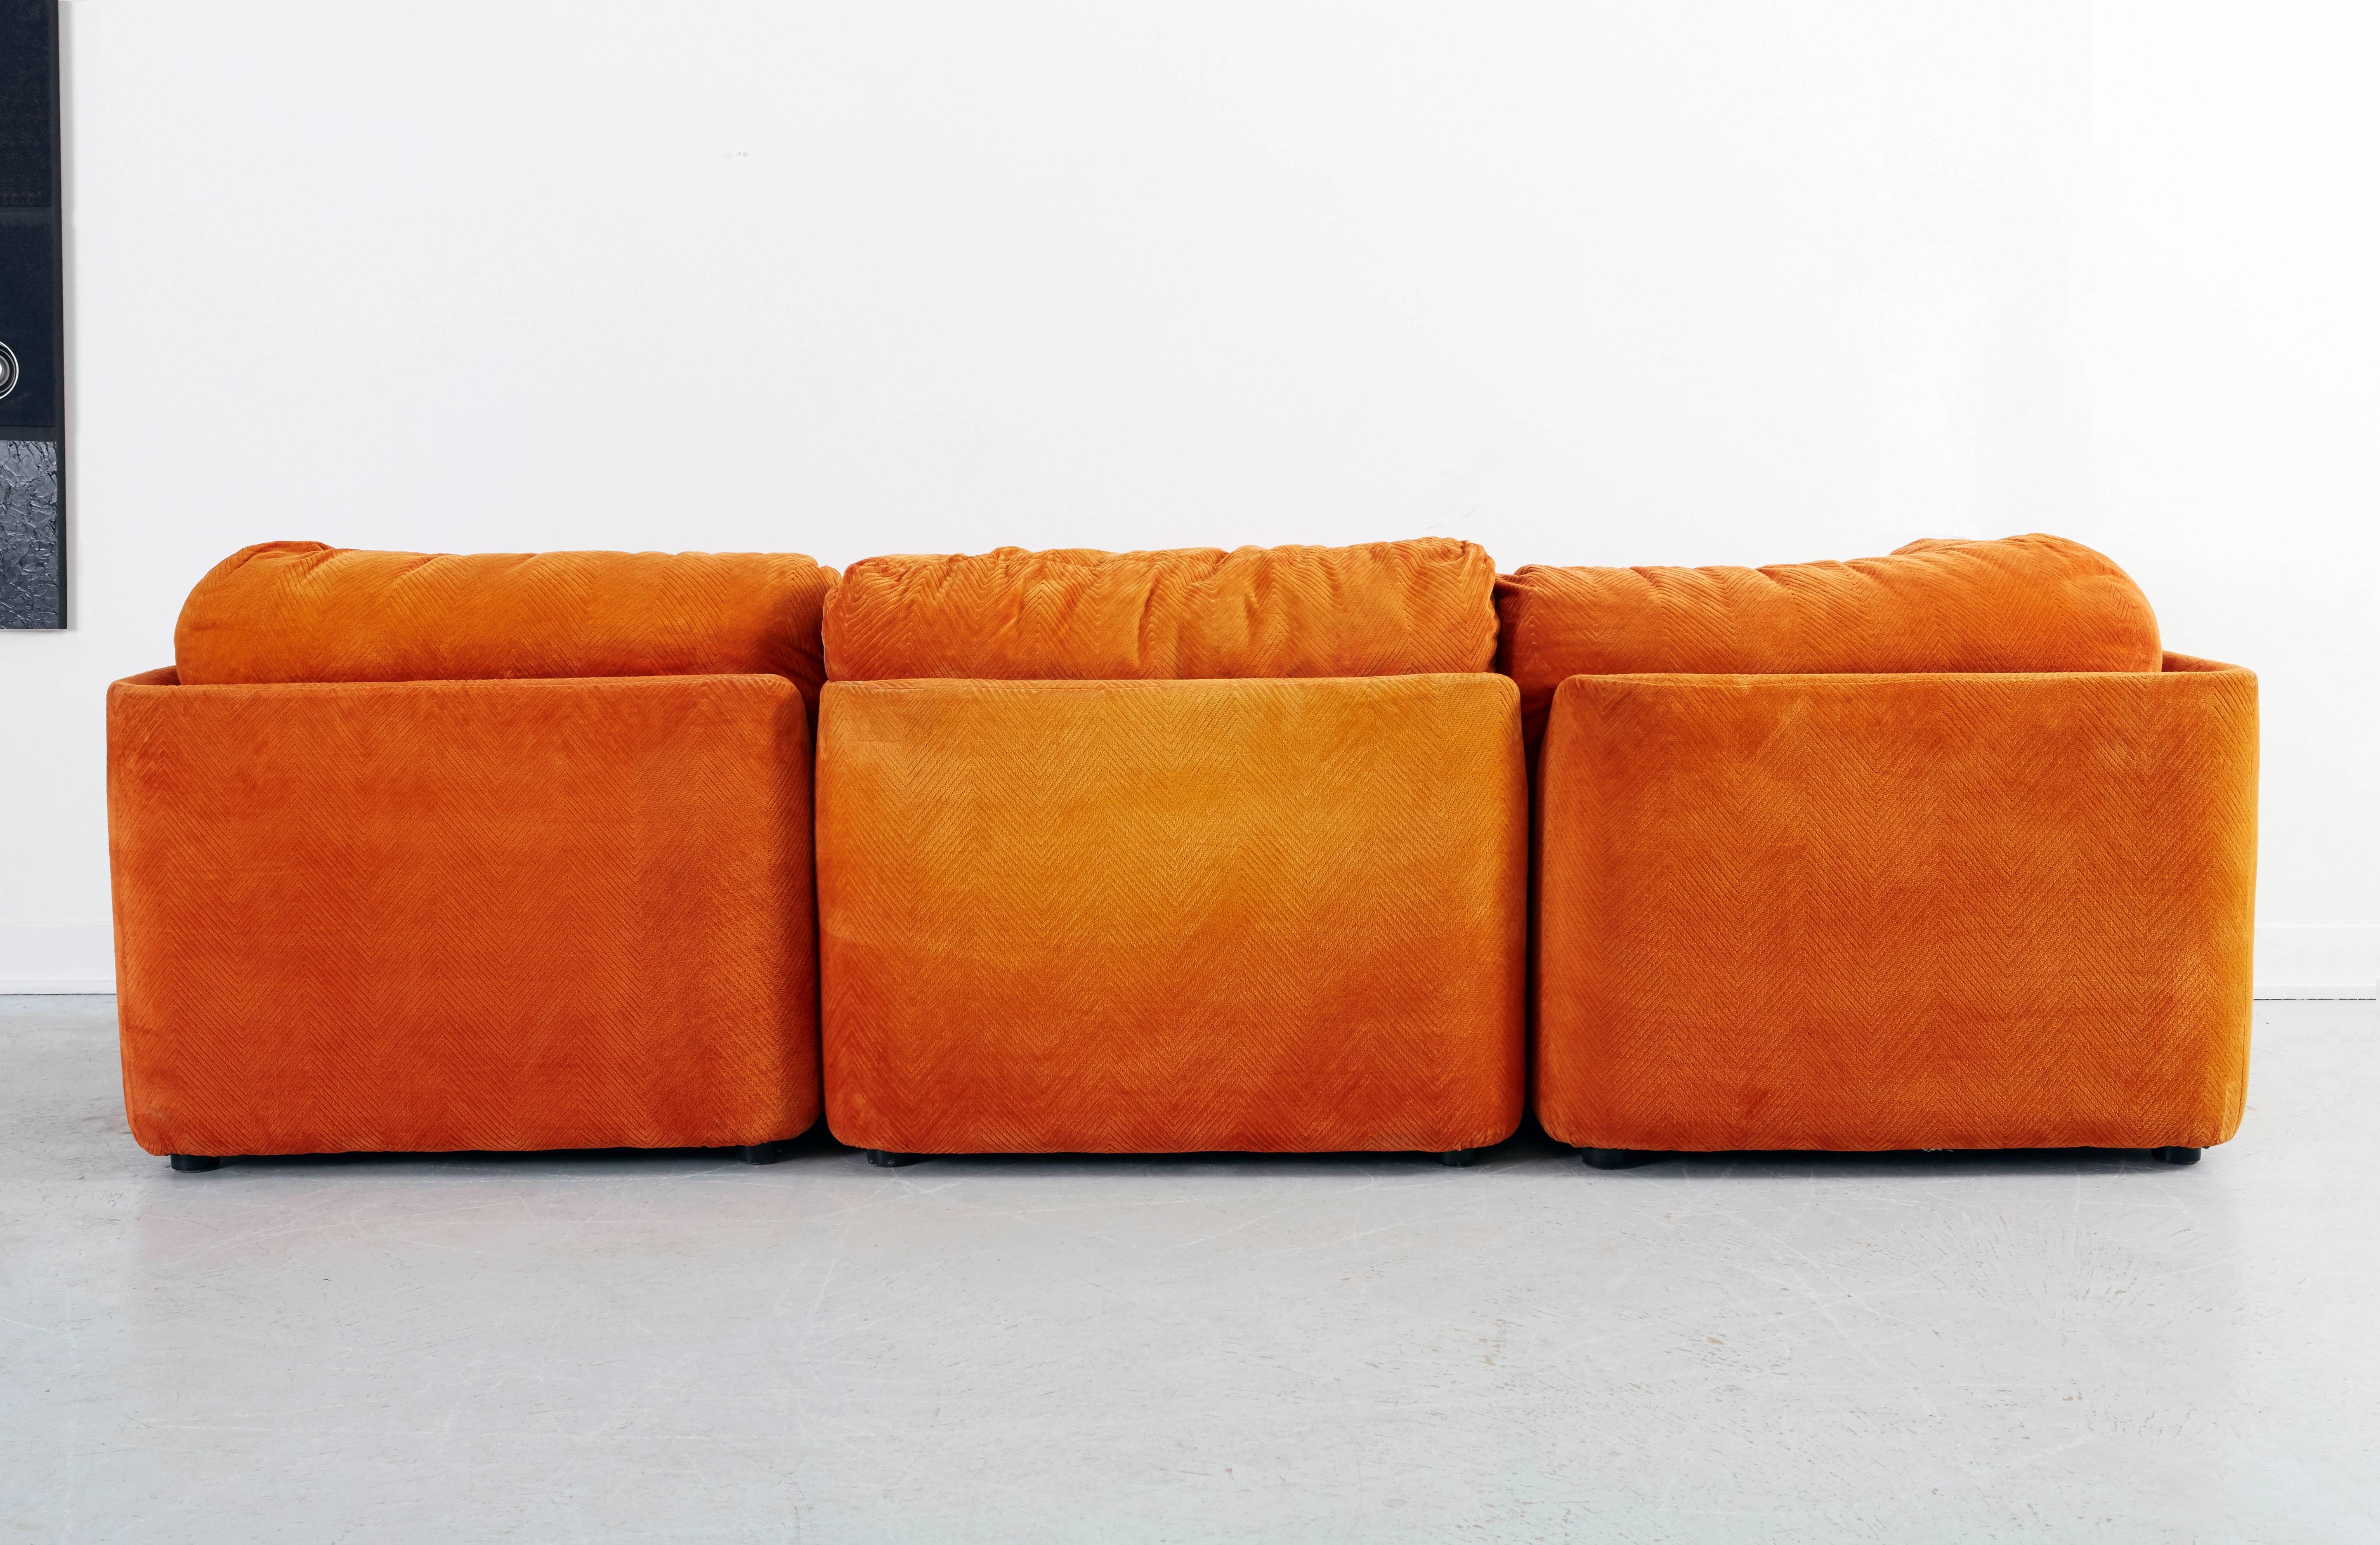 American Milo Baughman for Directional Sofa with Original Upholstery